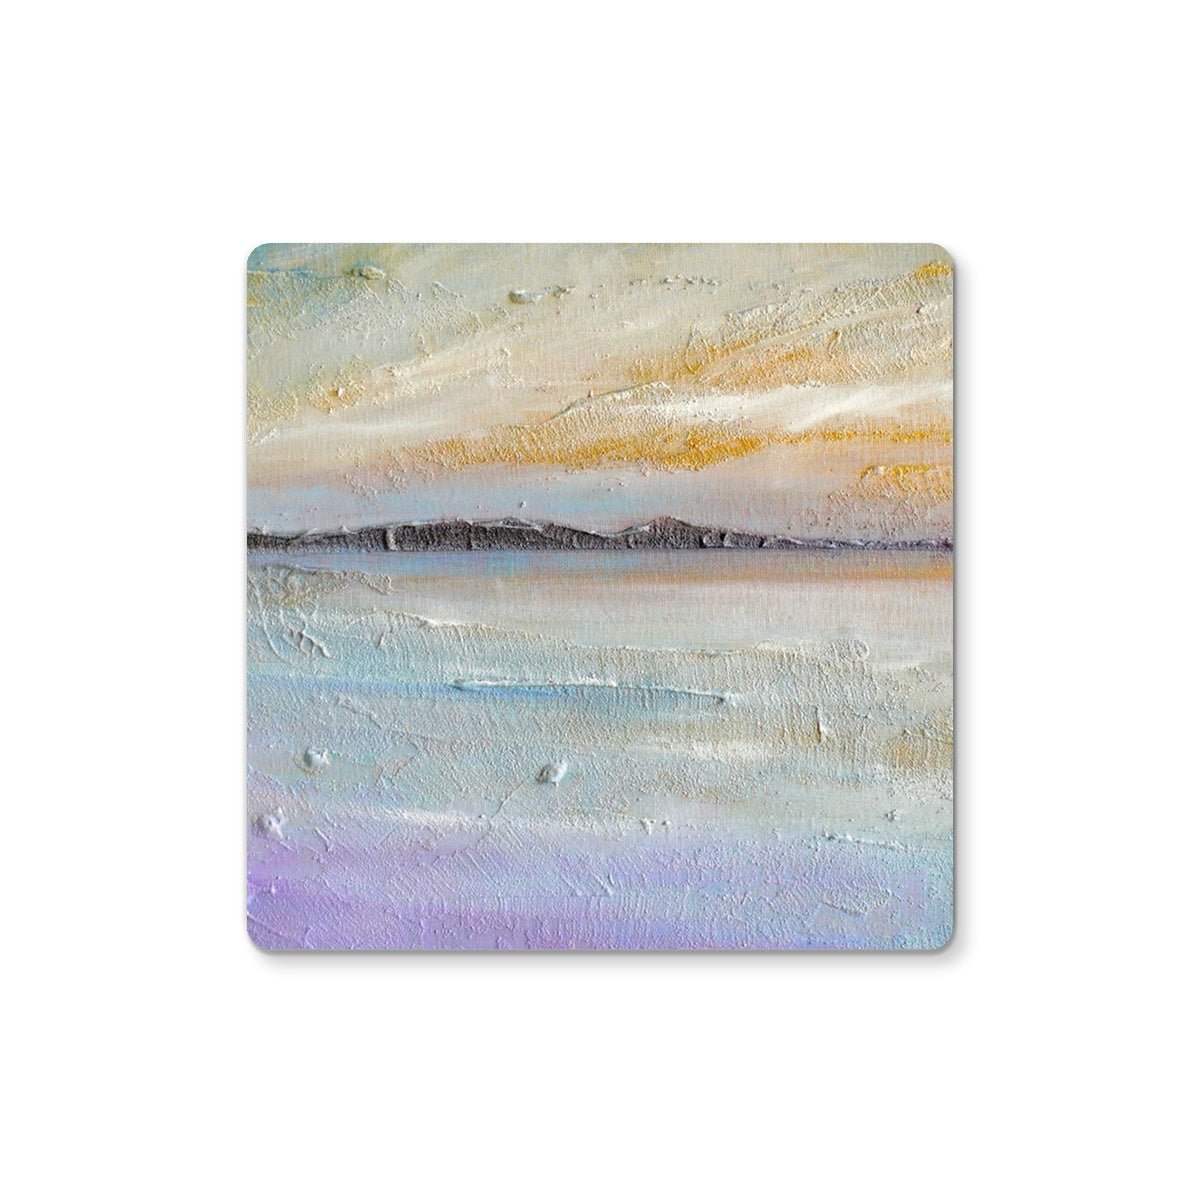 Sollas Beach South Uist Art Gifts Coaster-Coasters-Hebridean Islands Art Gallery-6 Coasters-Paintings, Prints, Homeware, Art Gifts From Scotland By Scottish Artist Kevin Hunter